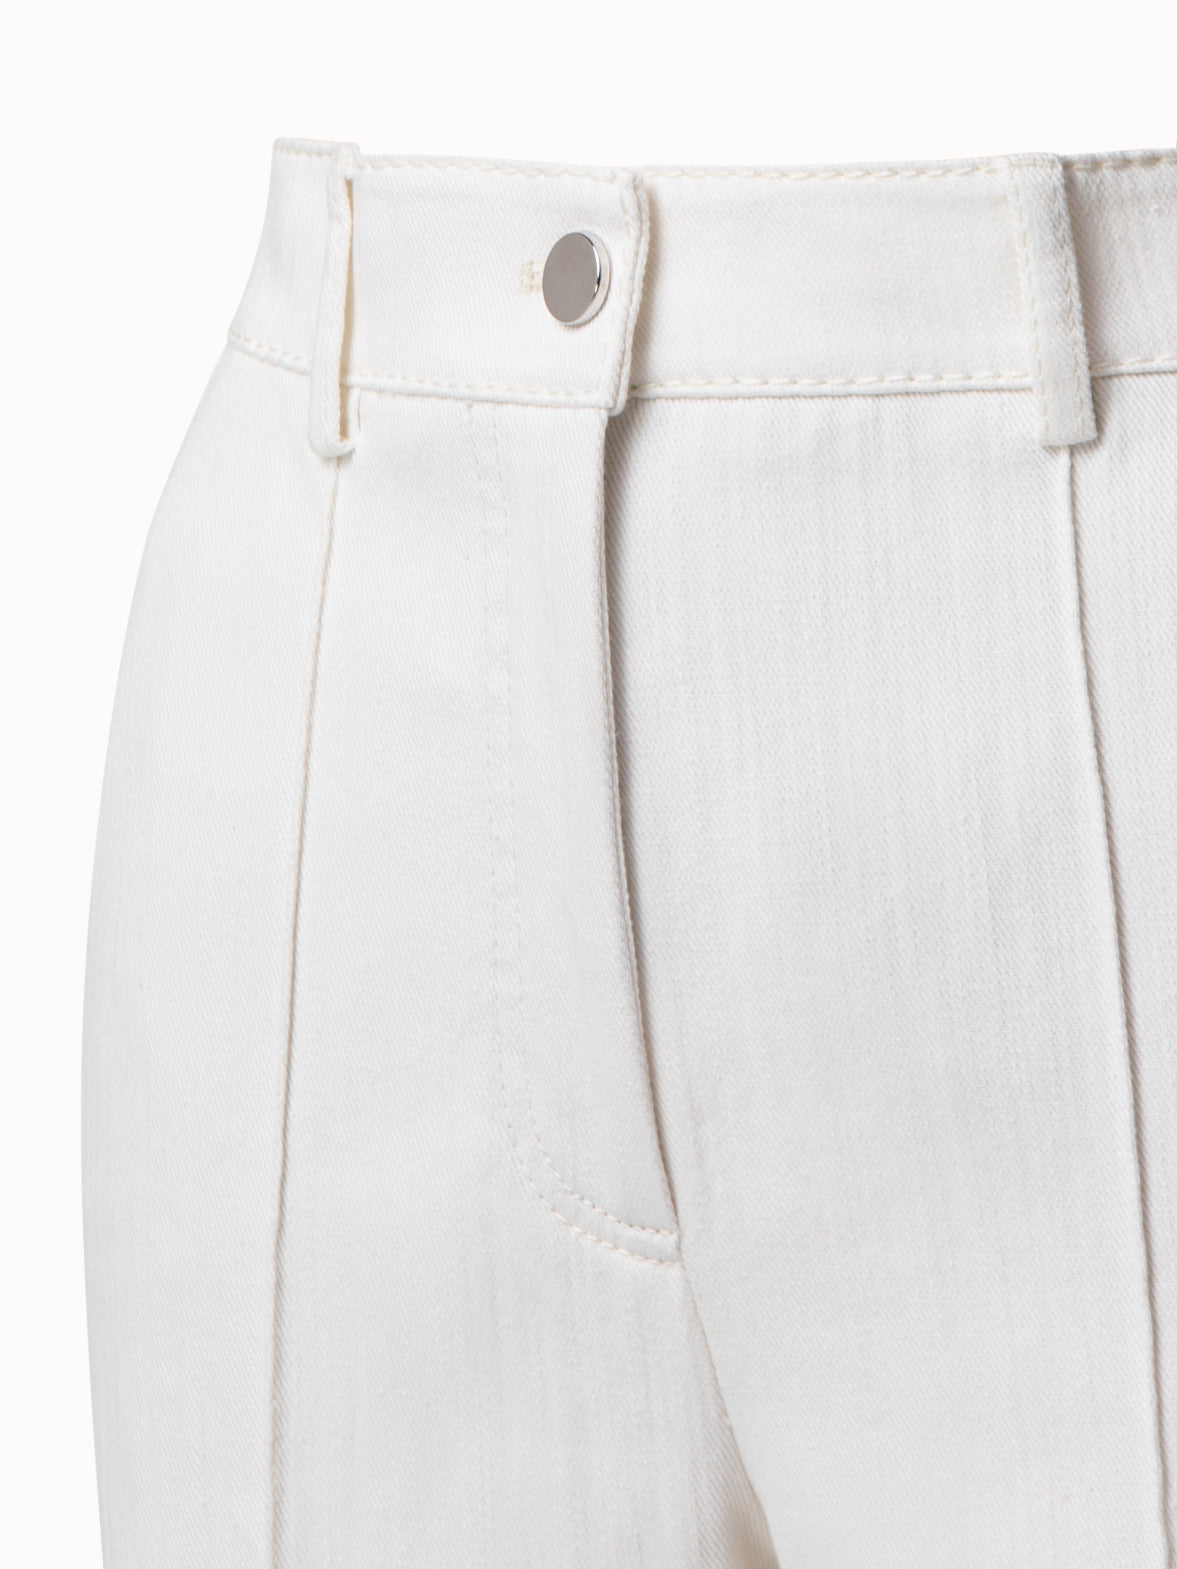 Shop Ankle Length Pants with Pocket Detail and Elasticised